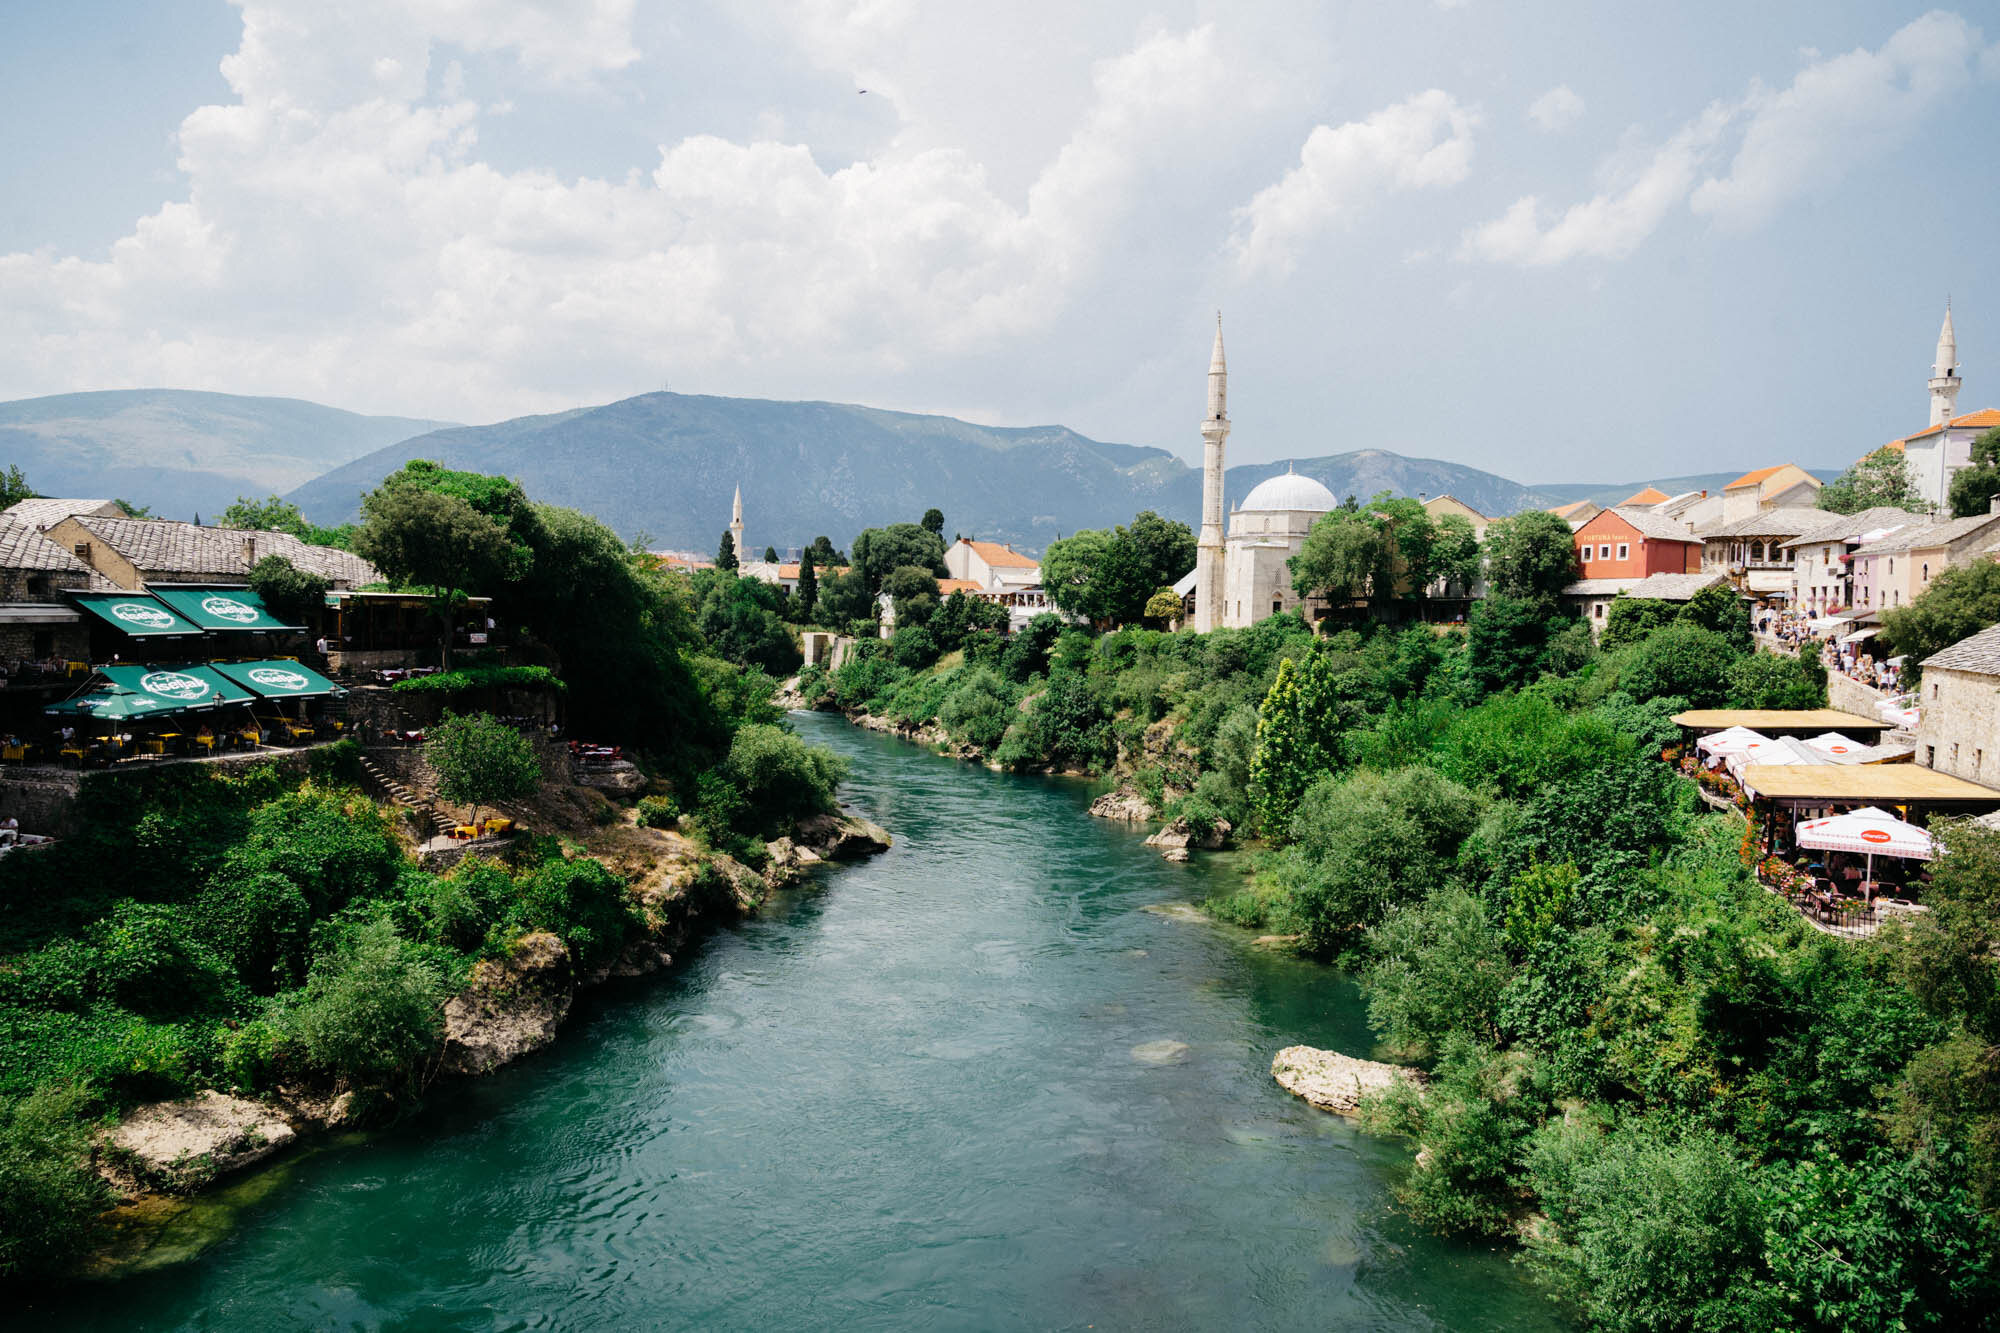  Vestiges of Ottoman architecture - like the Hadži Kurt Mosque - can be seen dotted around Mostar. They are characterised by their shallow lead domes and slim pointed minarets as seen here on the right of the river. 